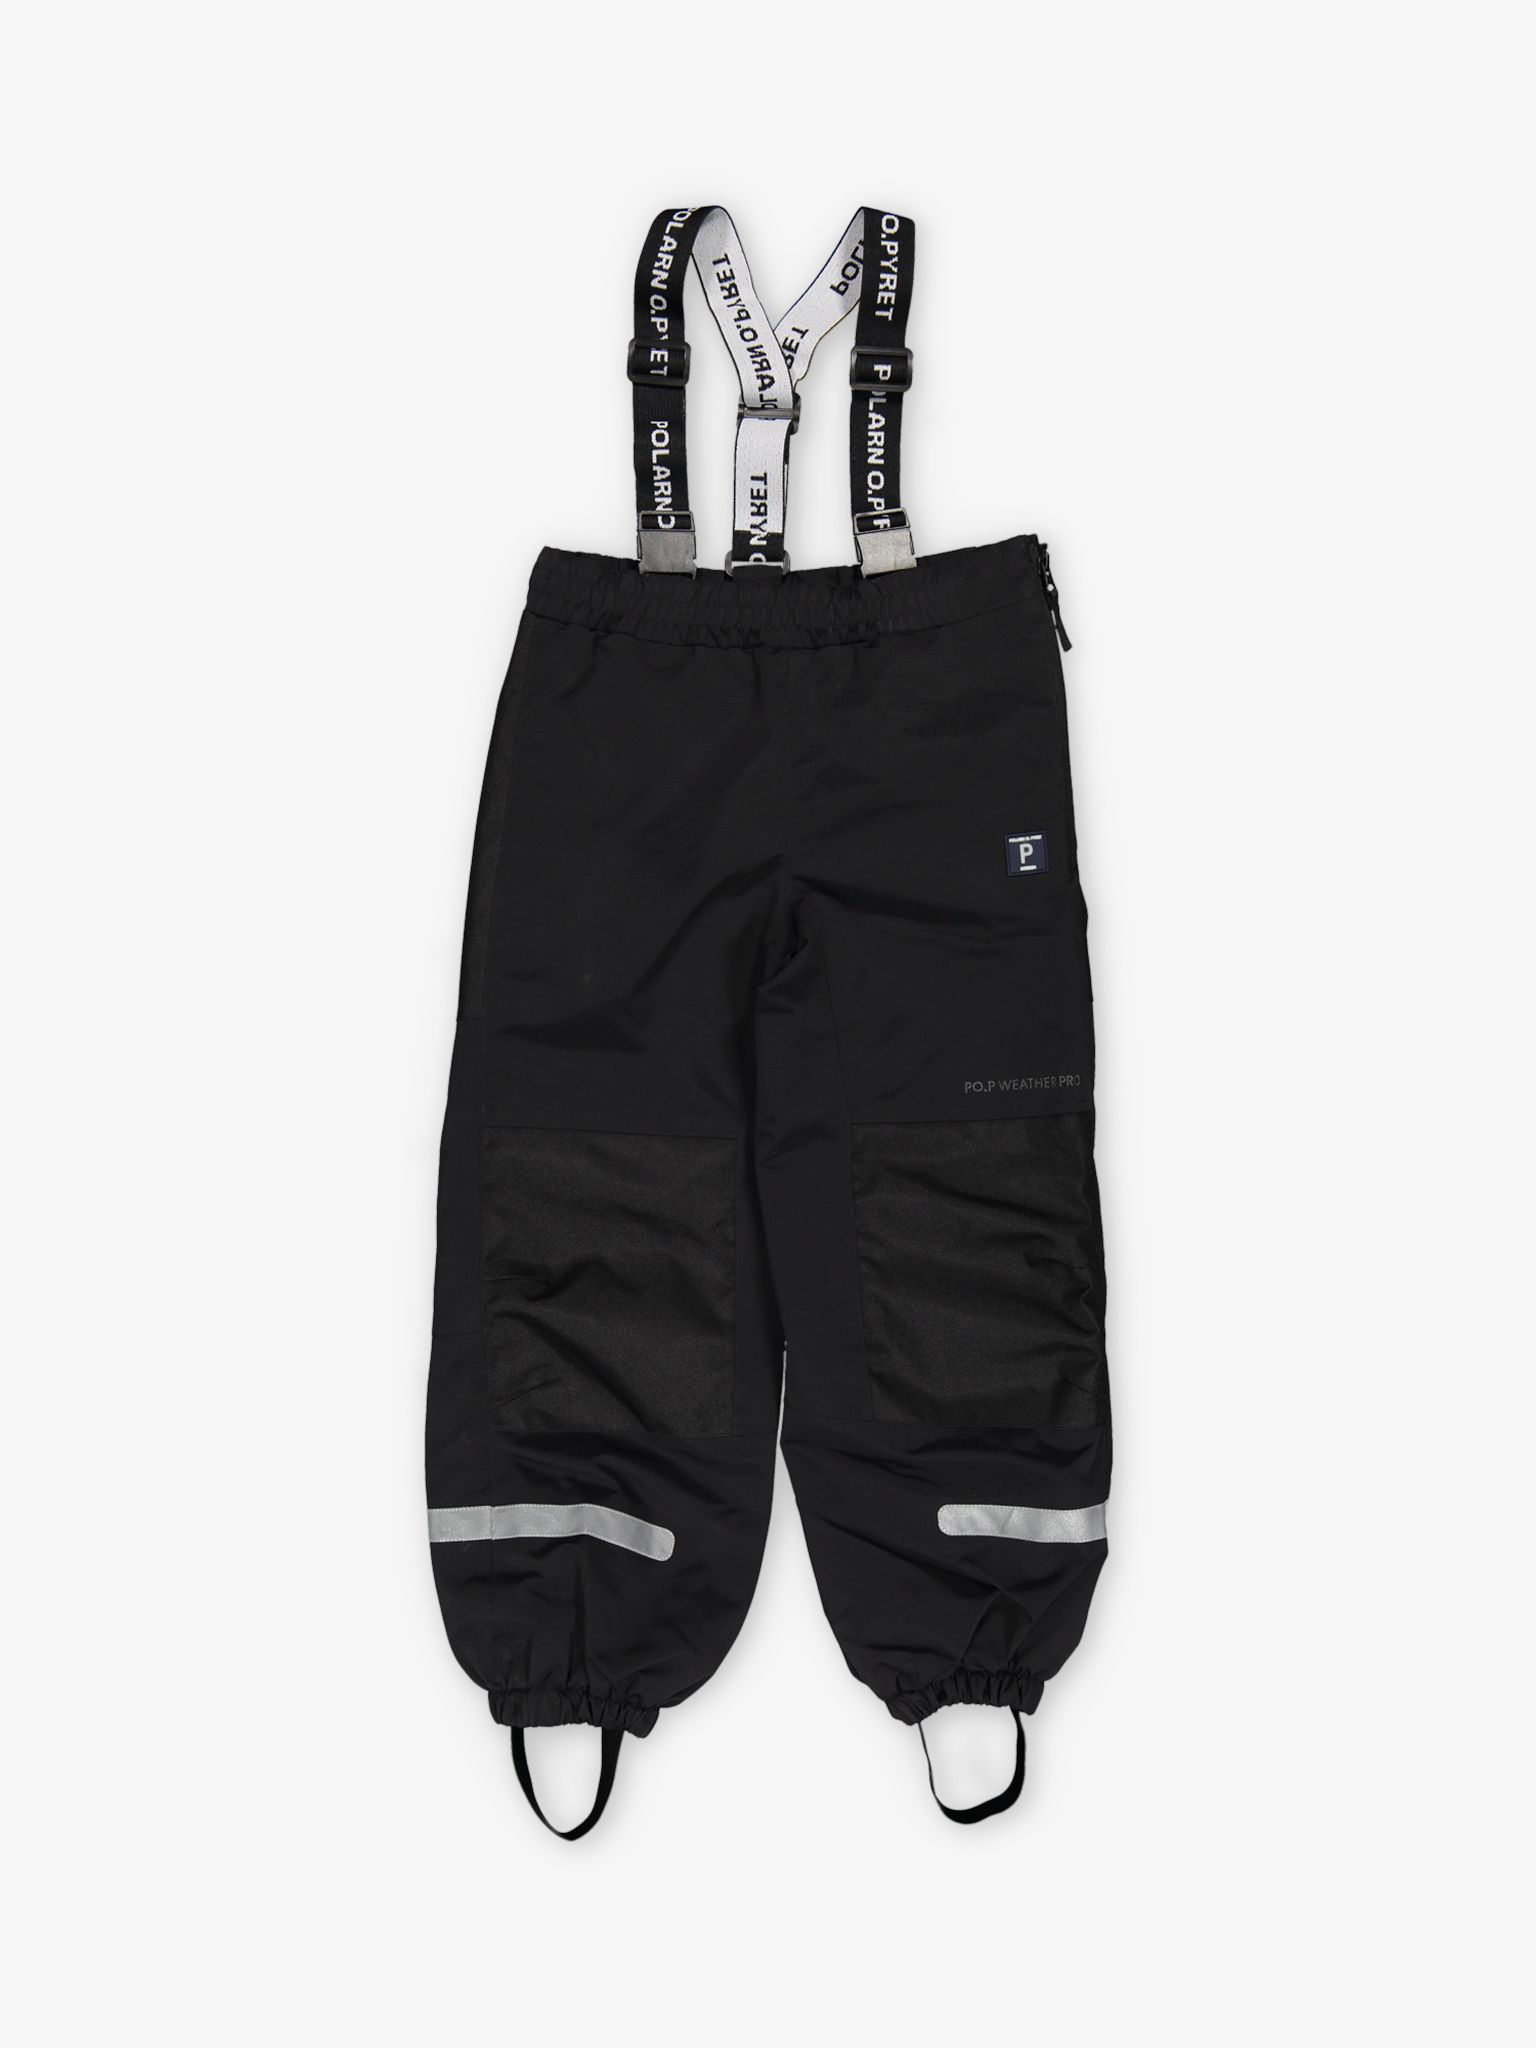 Image of Polarn O Pyret Childrens Waterproof Shell Trousers Black